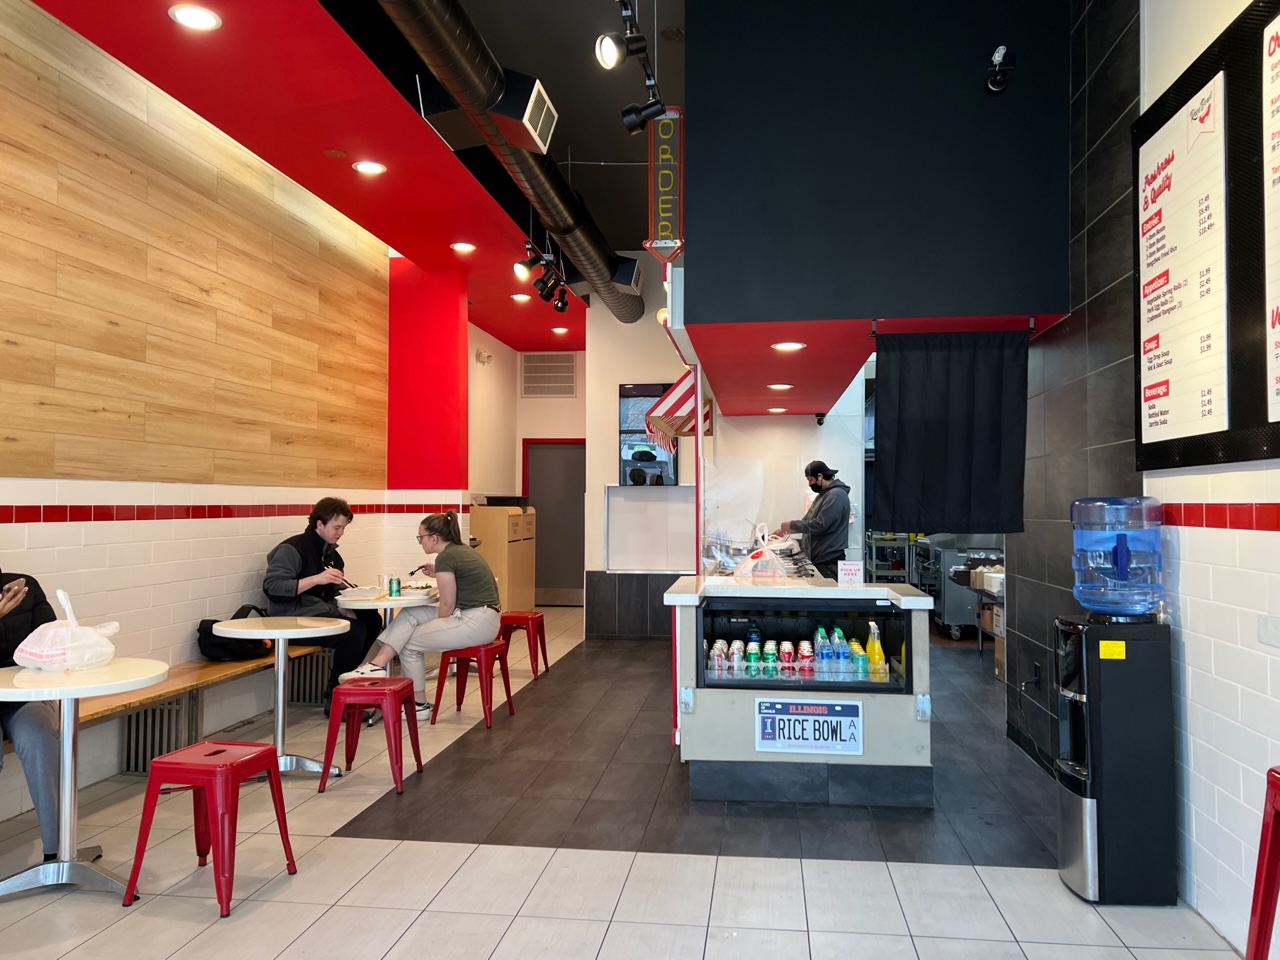 The interior of Rice Bowl has a red ceiling and several circle tables along the left wall. There is a counter in the middle that has a single employee in a black shirt preparing food for the line. Photo by Alyssa Buckley.